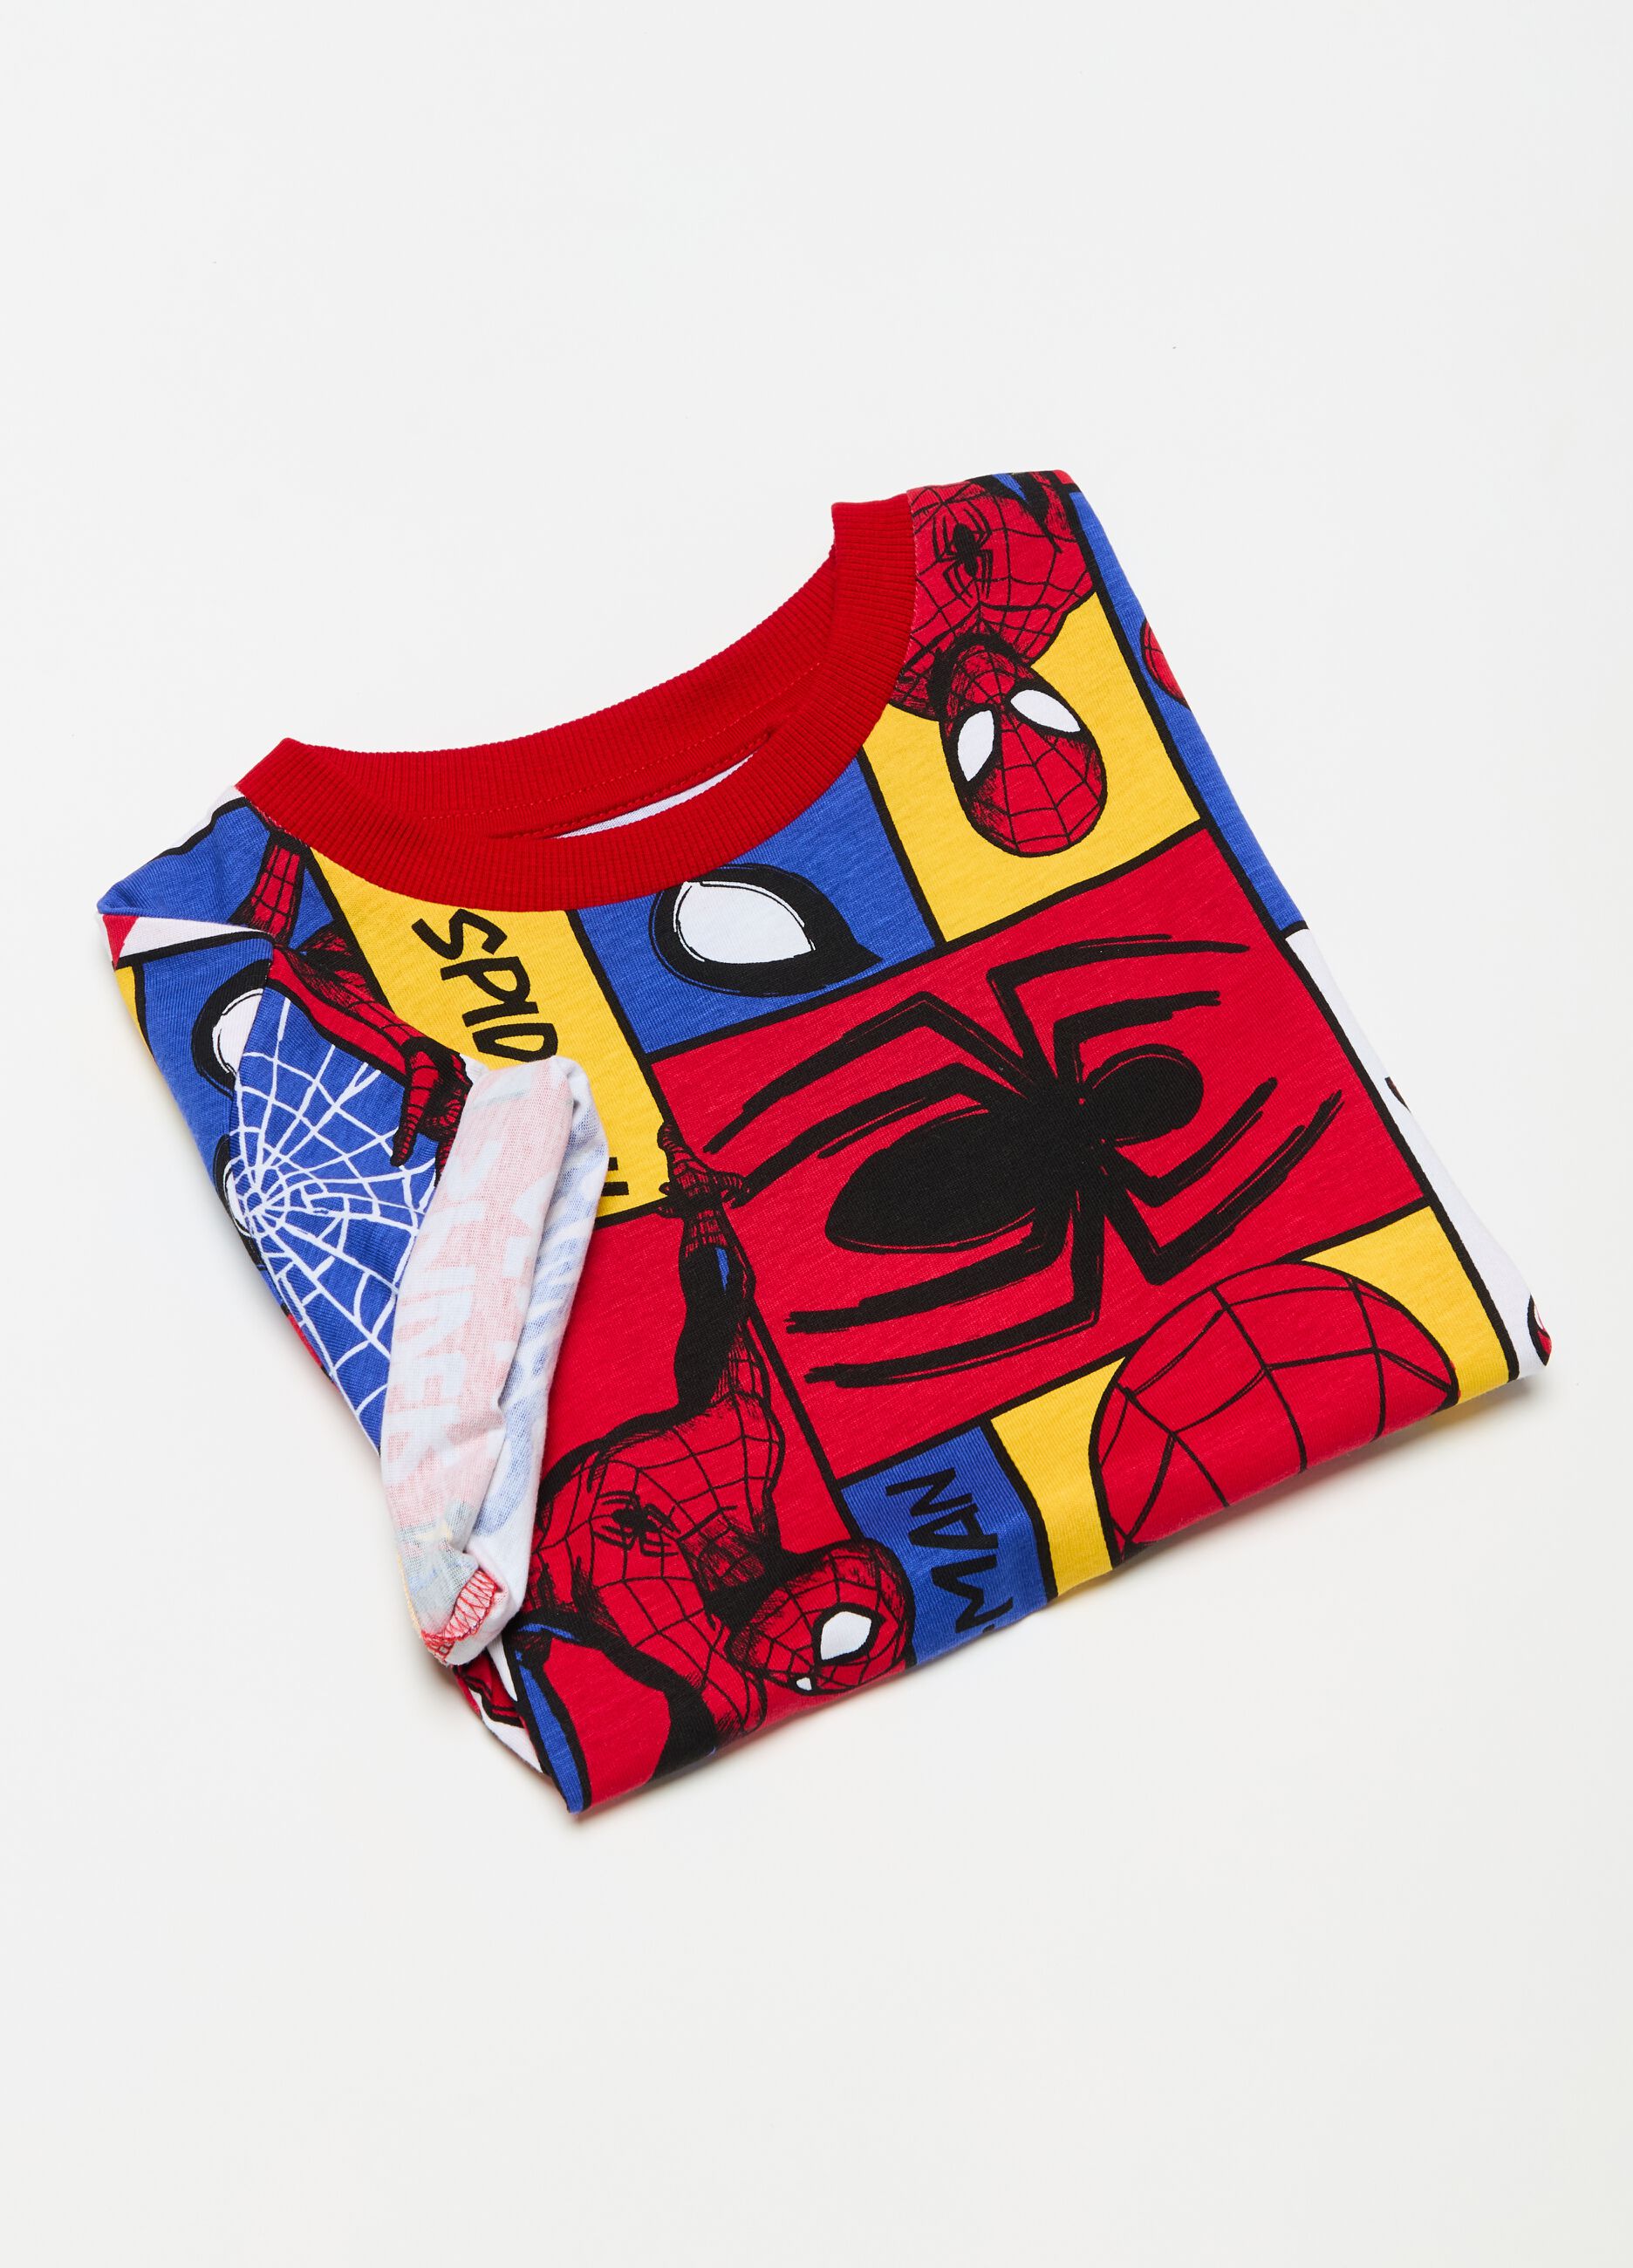 Cotton T-shirt with Spider-Man print